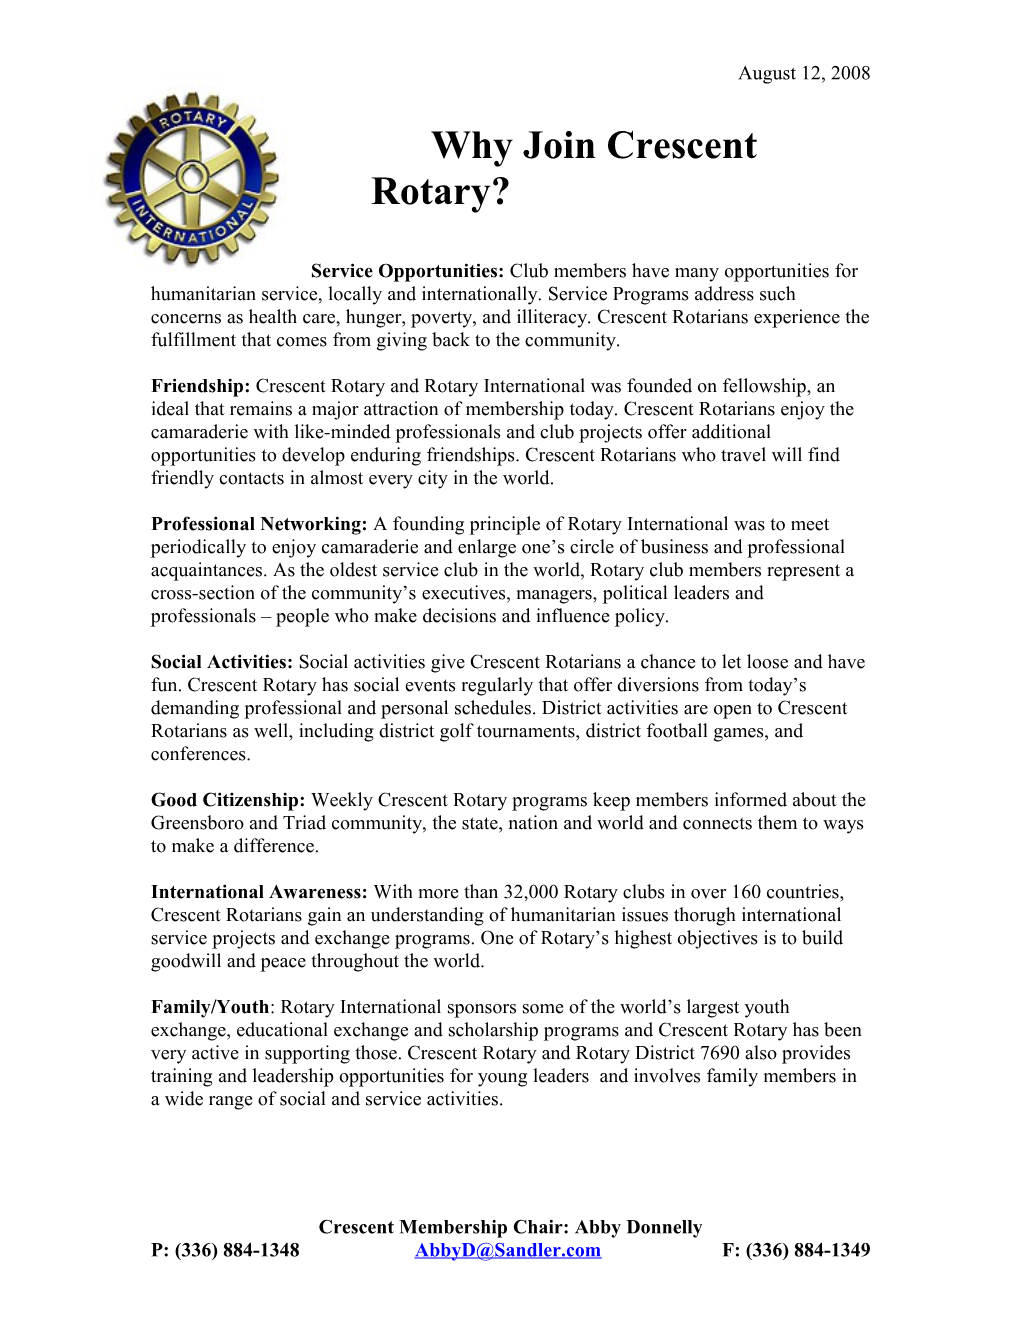 Why Join Crescent Rotary